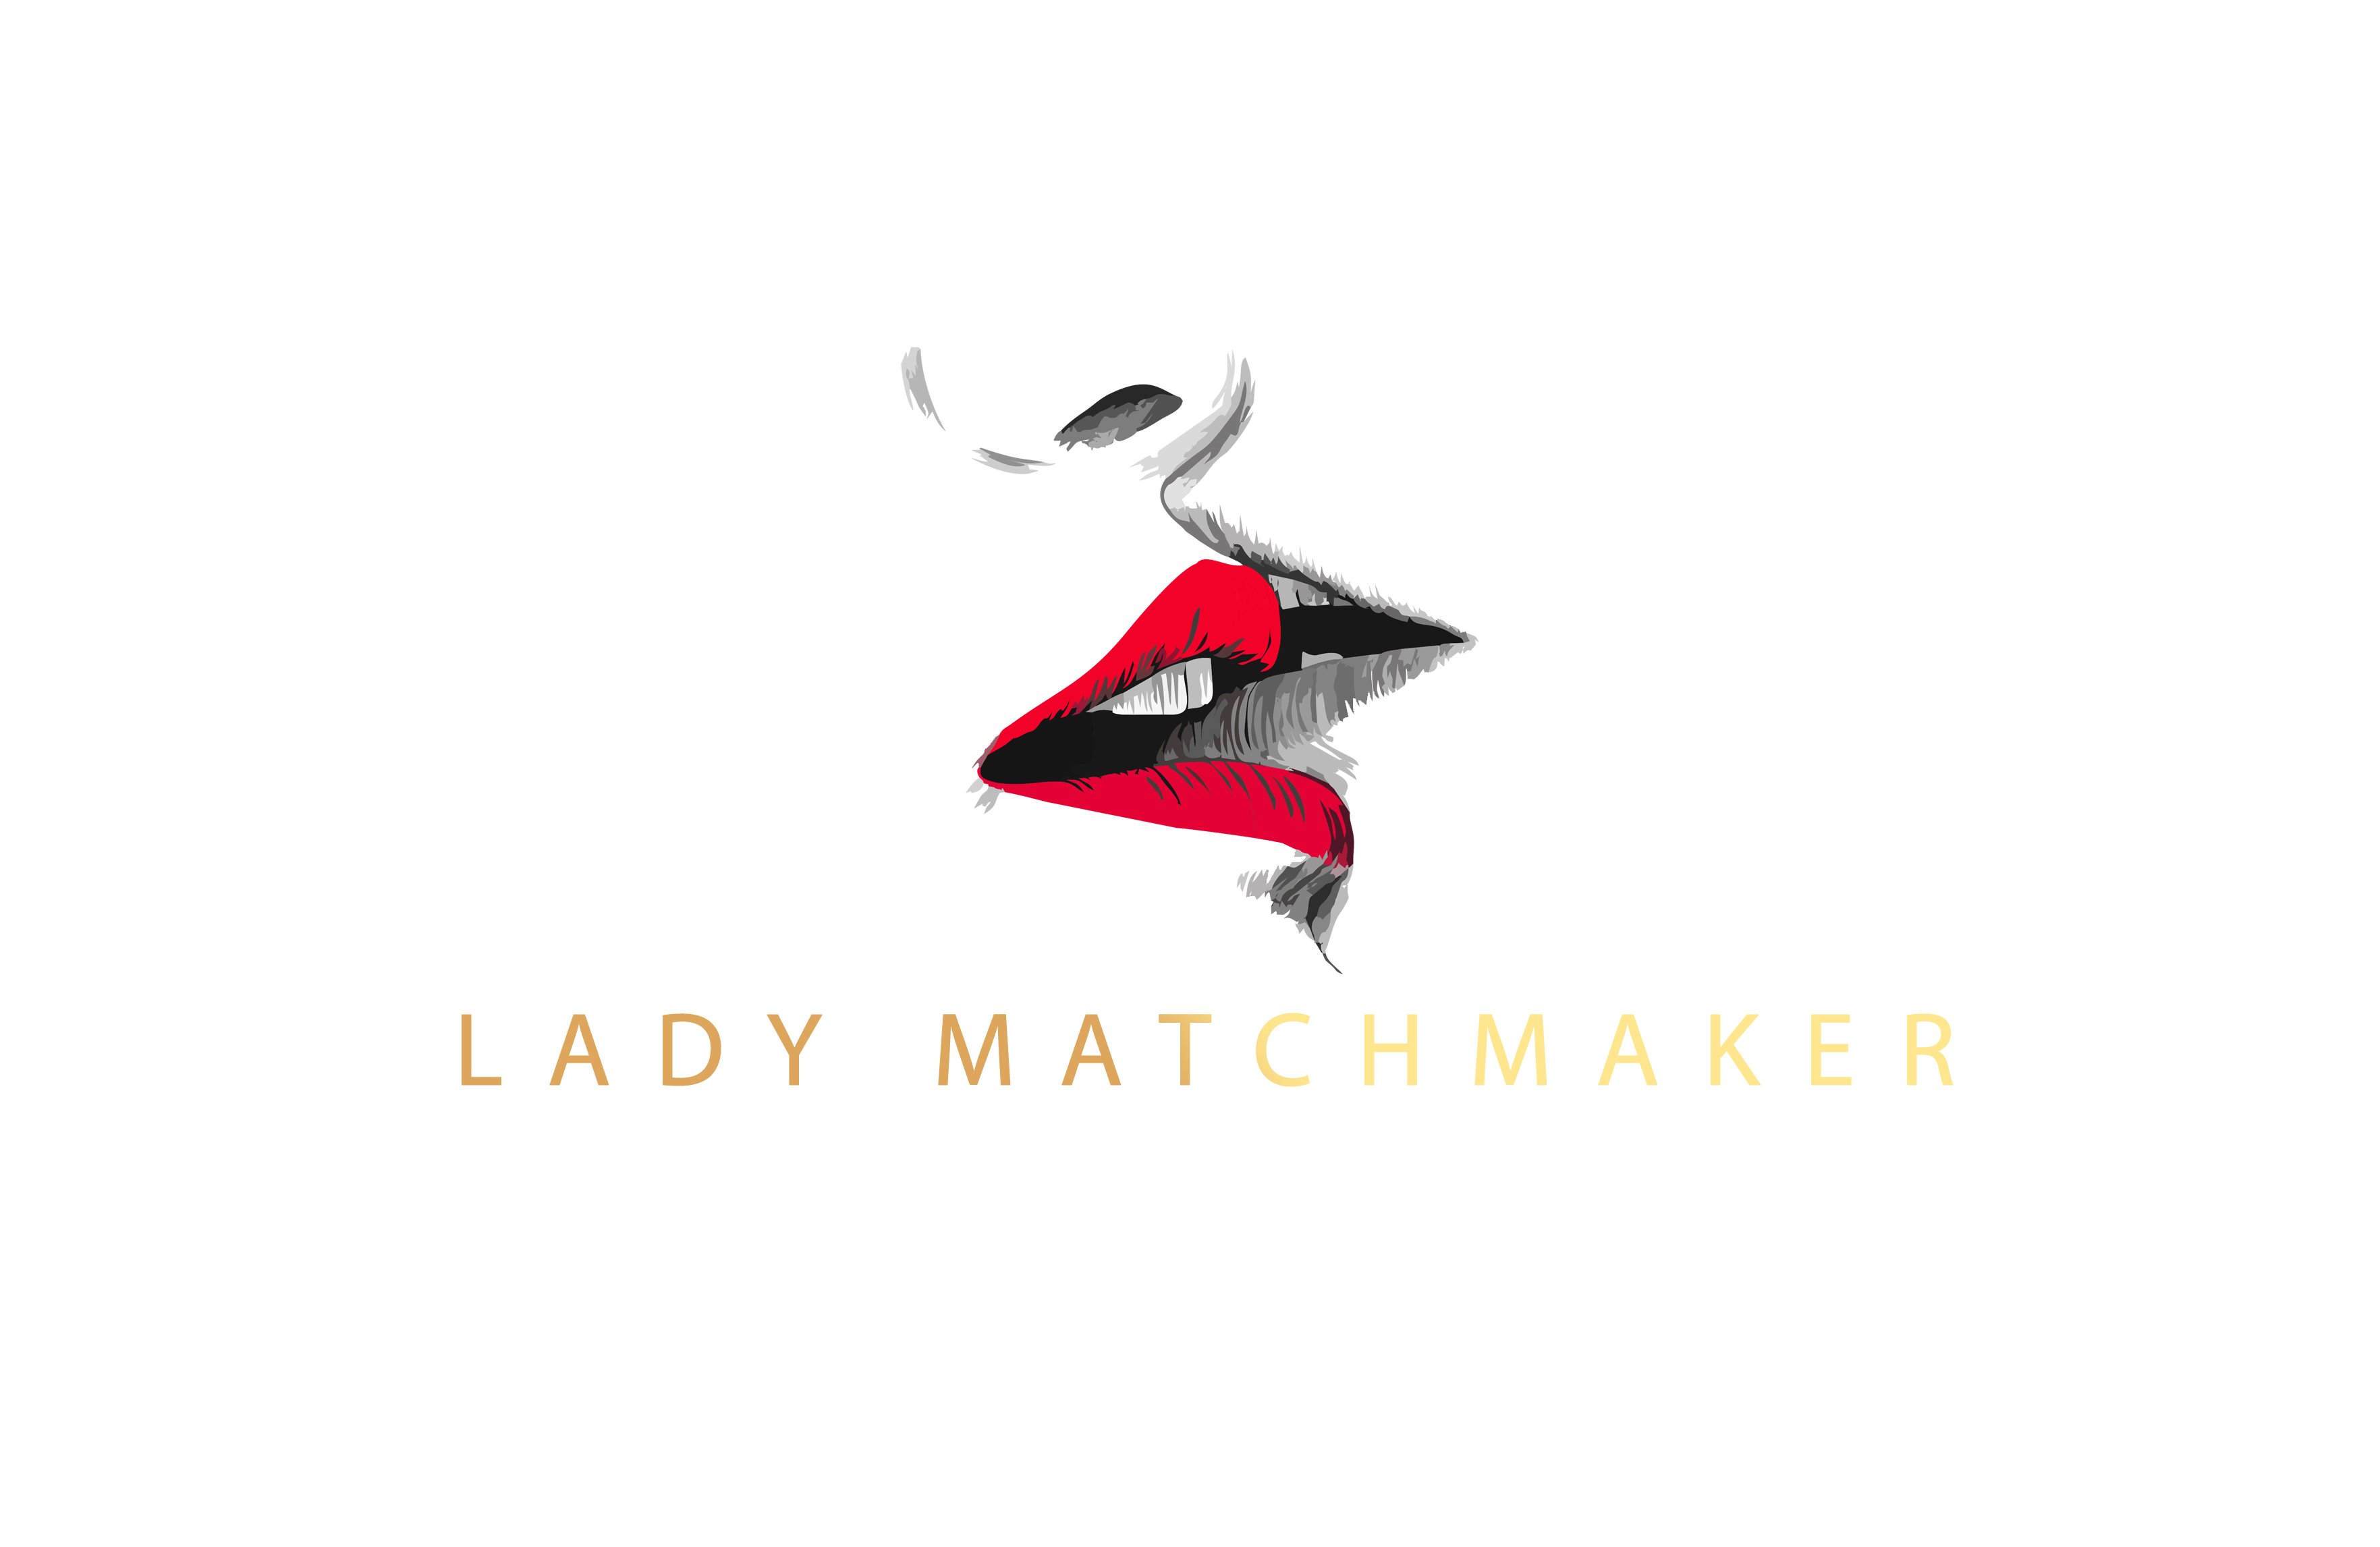 Lady Matchmaker, Friday, July 30, 2021, Press release picture